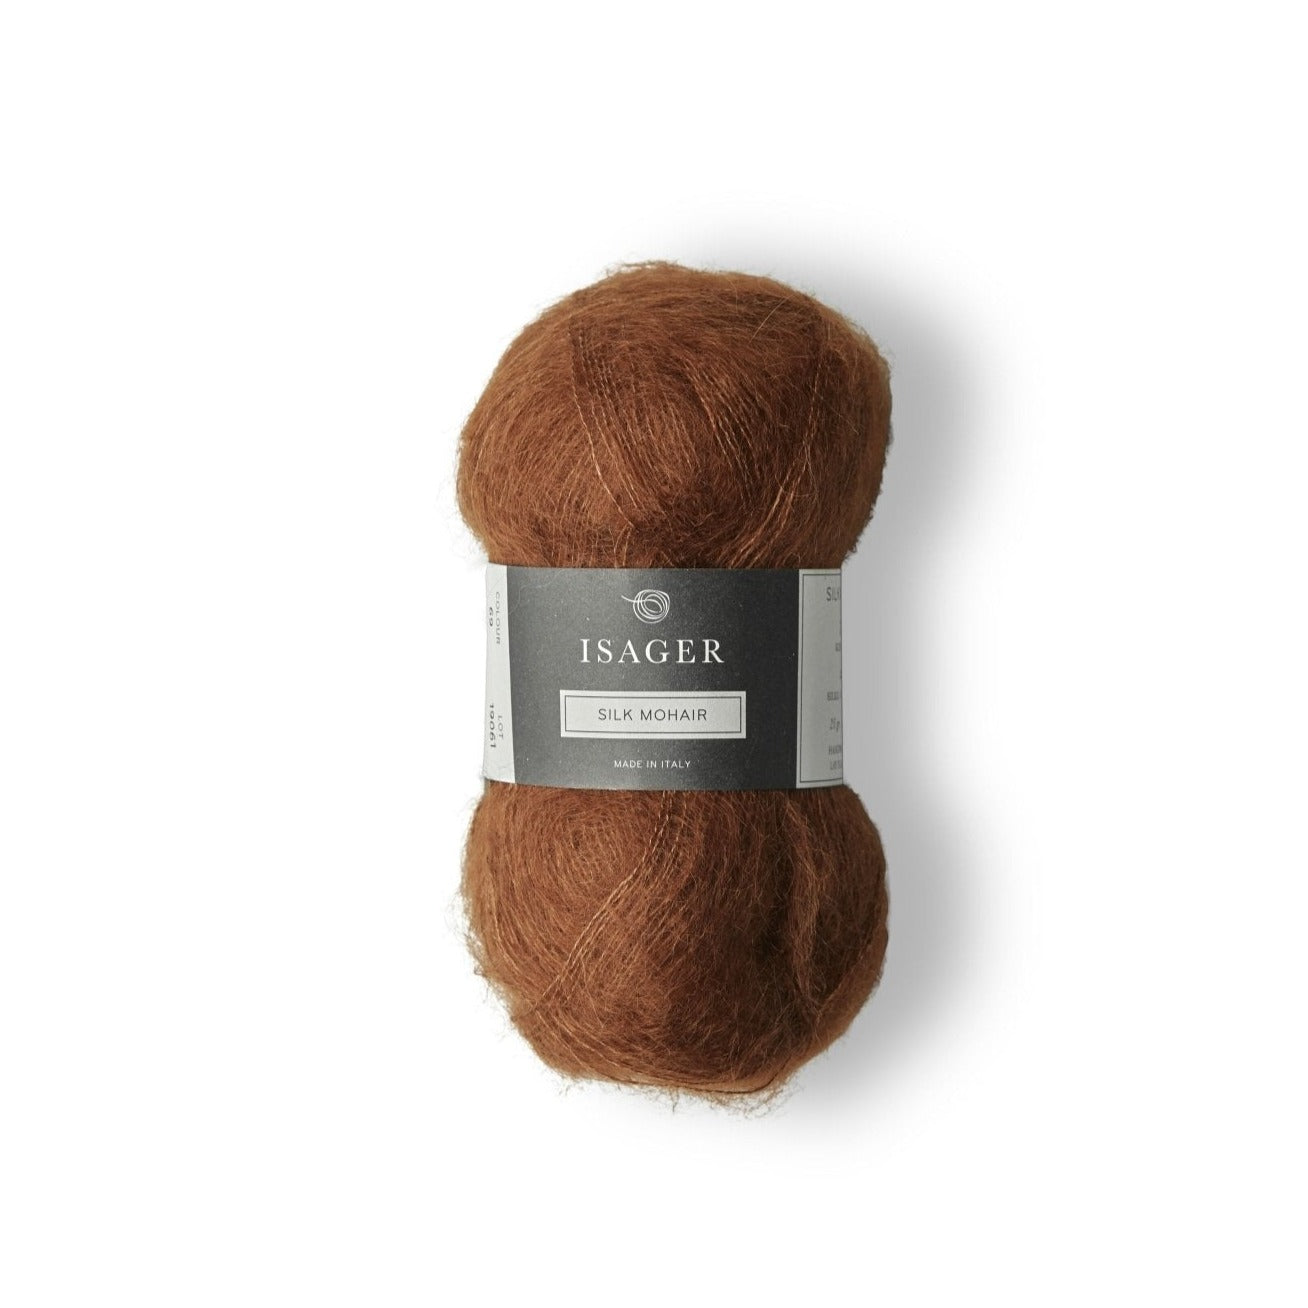 Isager Silk Mohair - 33 - 2 Ply - Isager - The Little Yarn Store